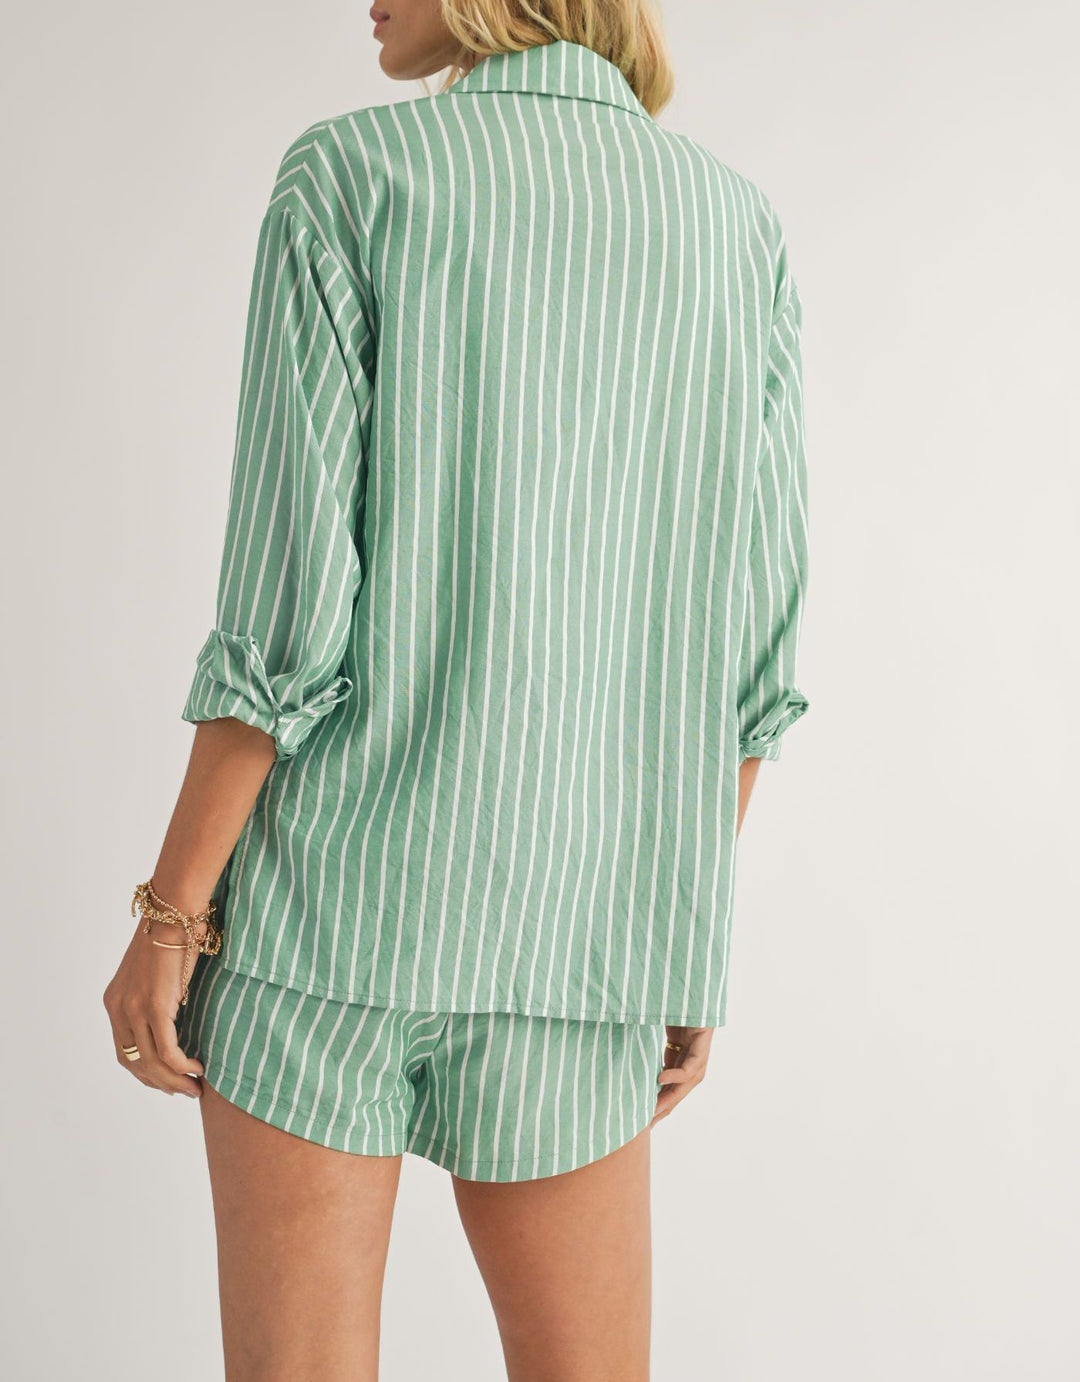 Traditions Striped Button Up Shirt | Sadie & Sage